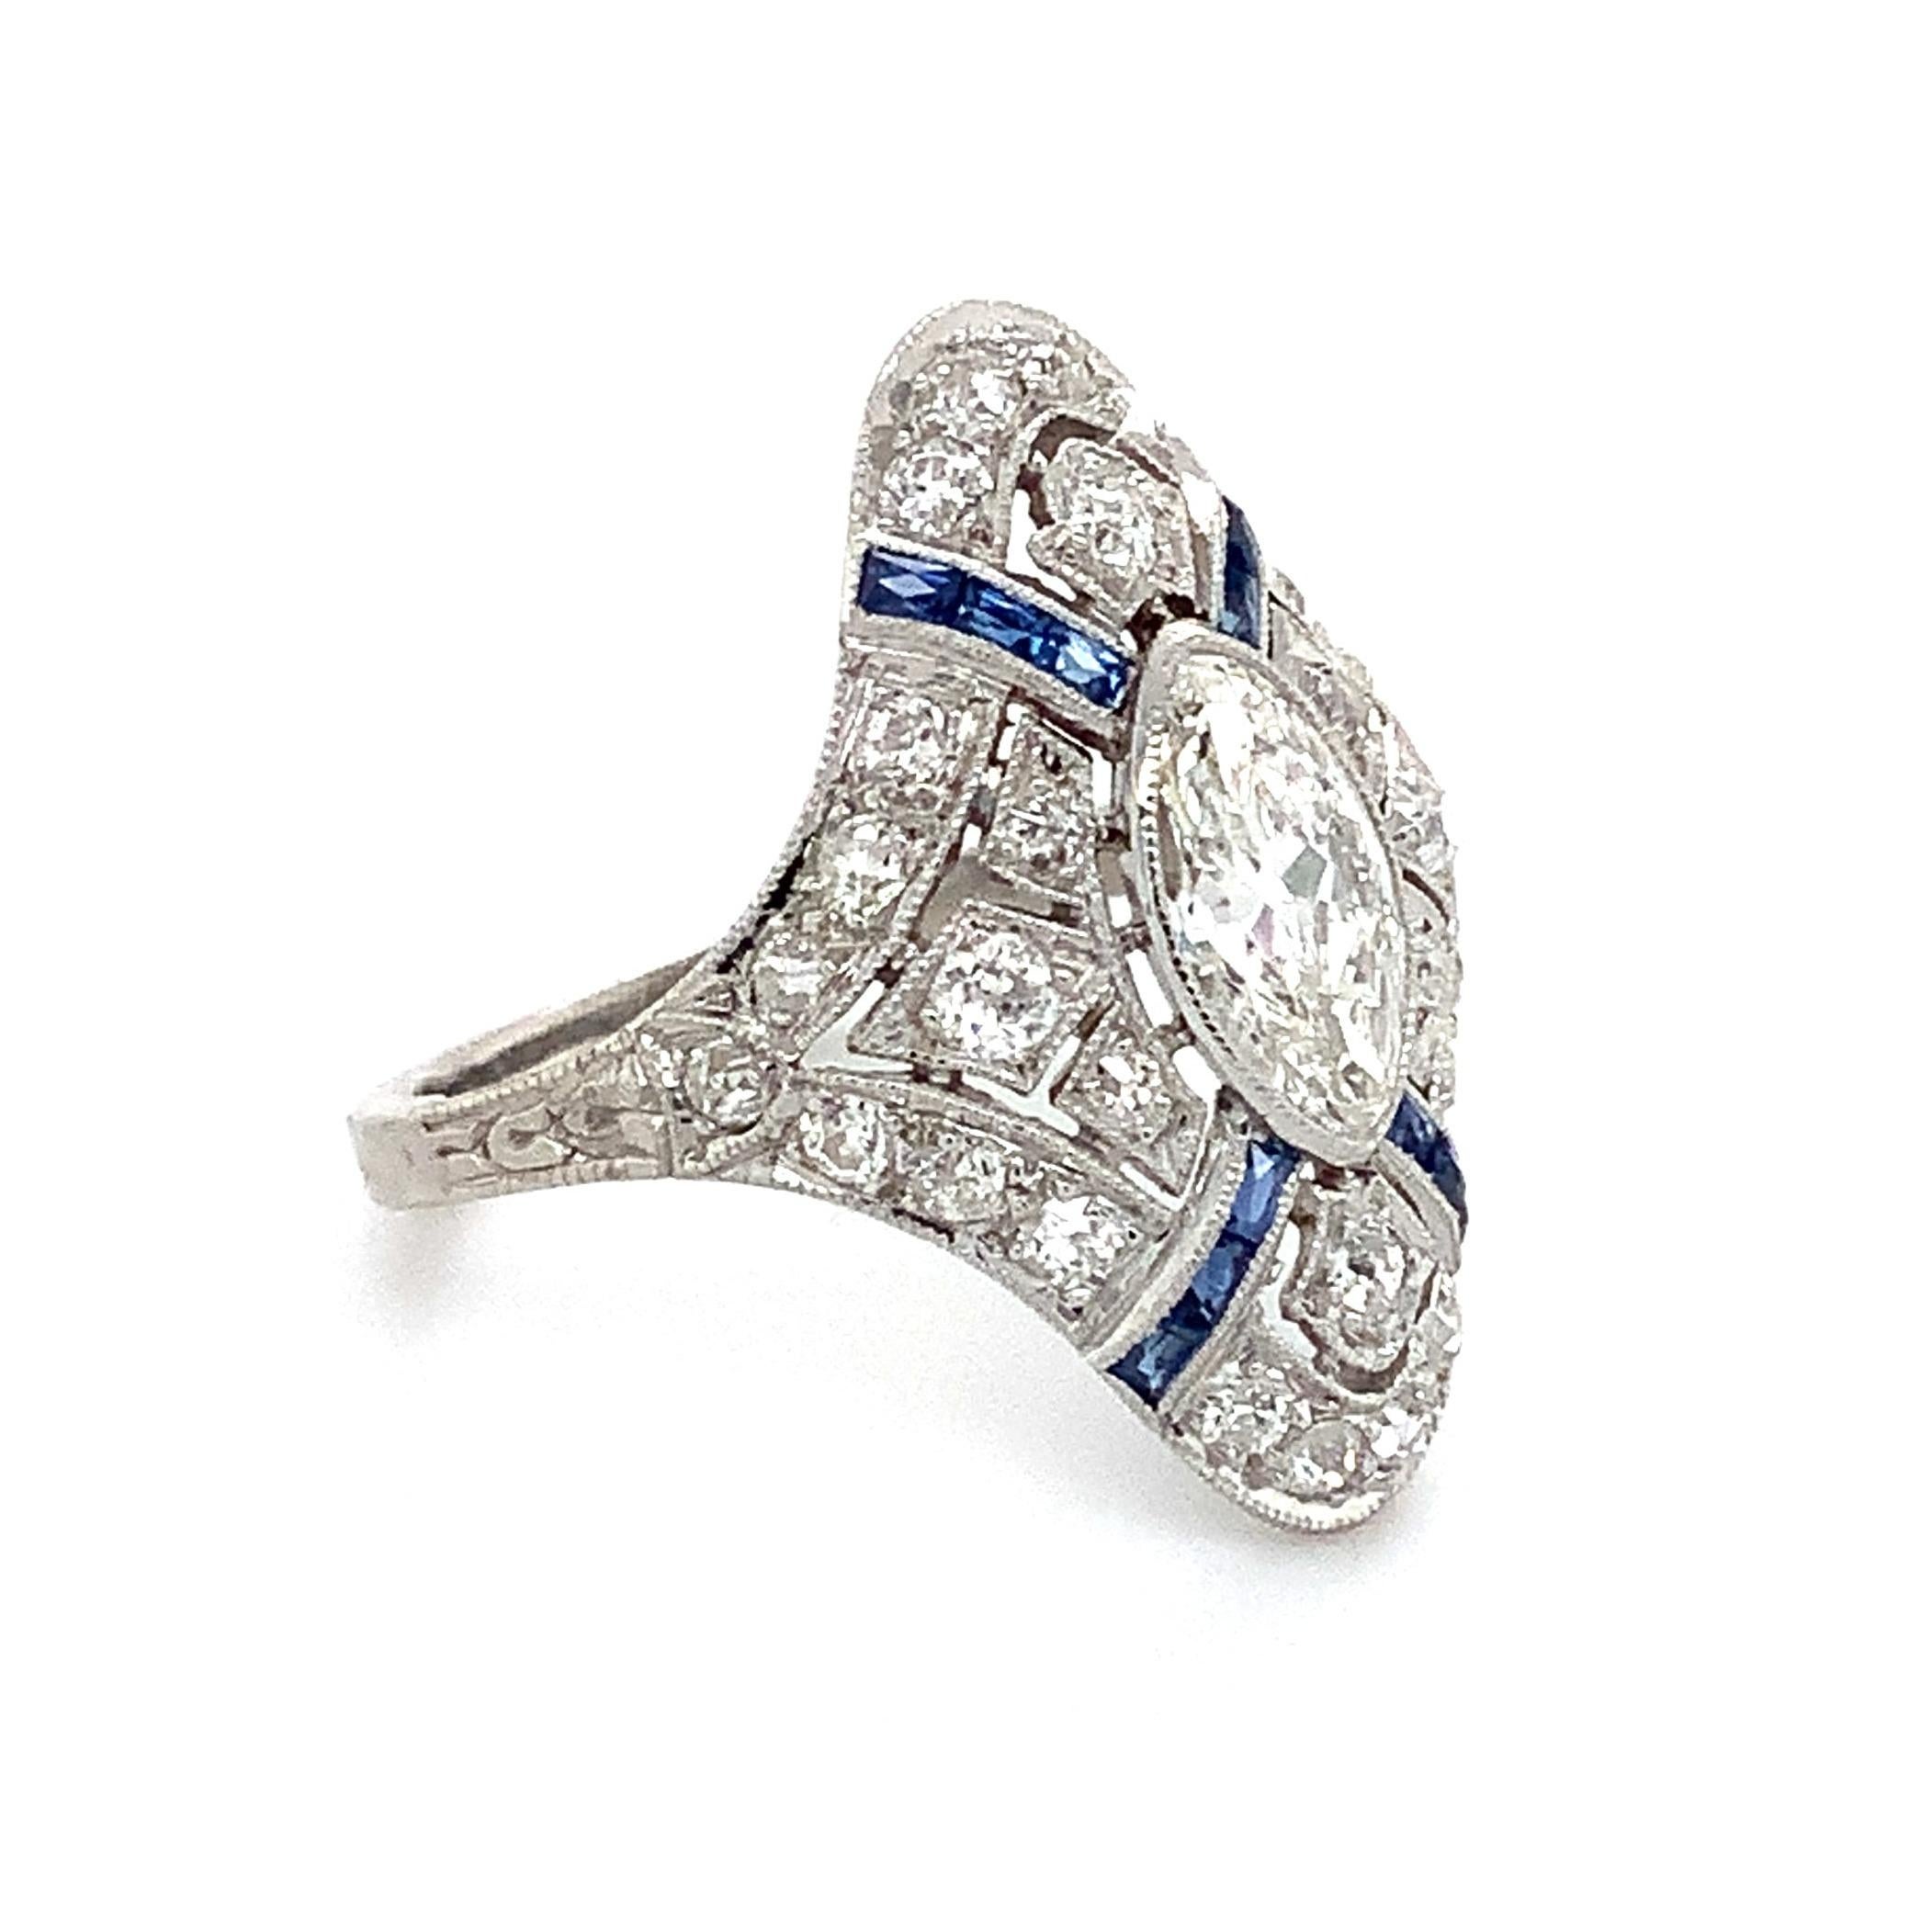 Antique Edwardian, Art Deco Filigree Marquise Diamond and Caliber Sapphire Ring In Fair Condition For Sale In Los Gatos, CA